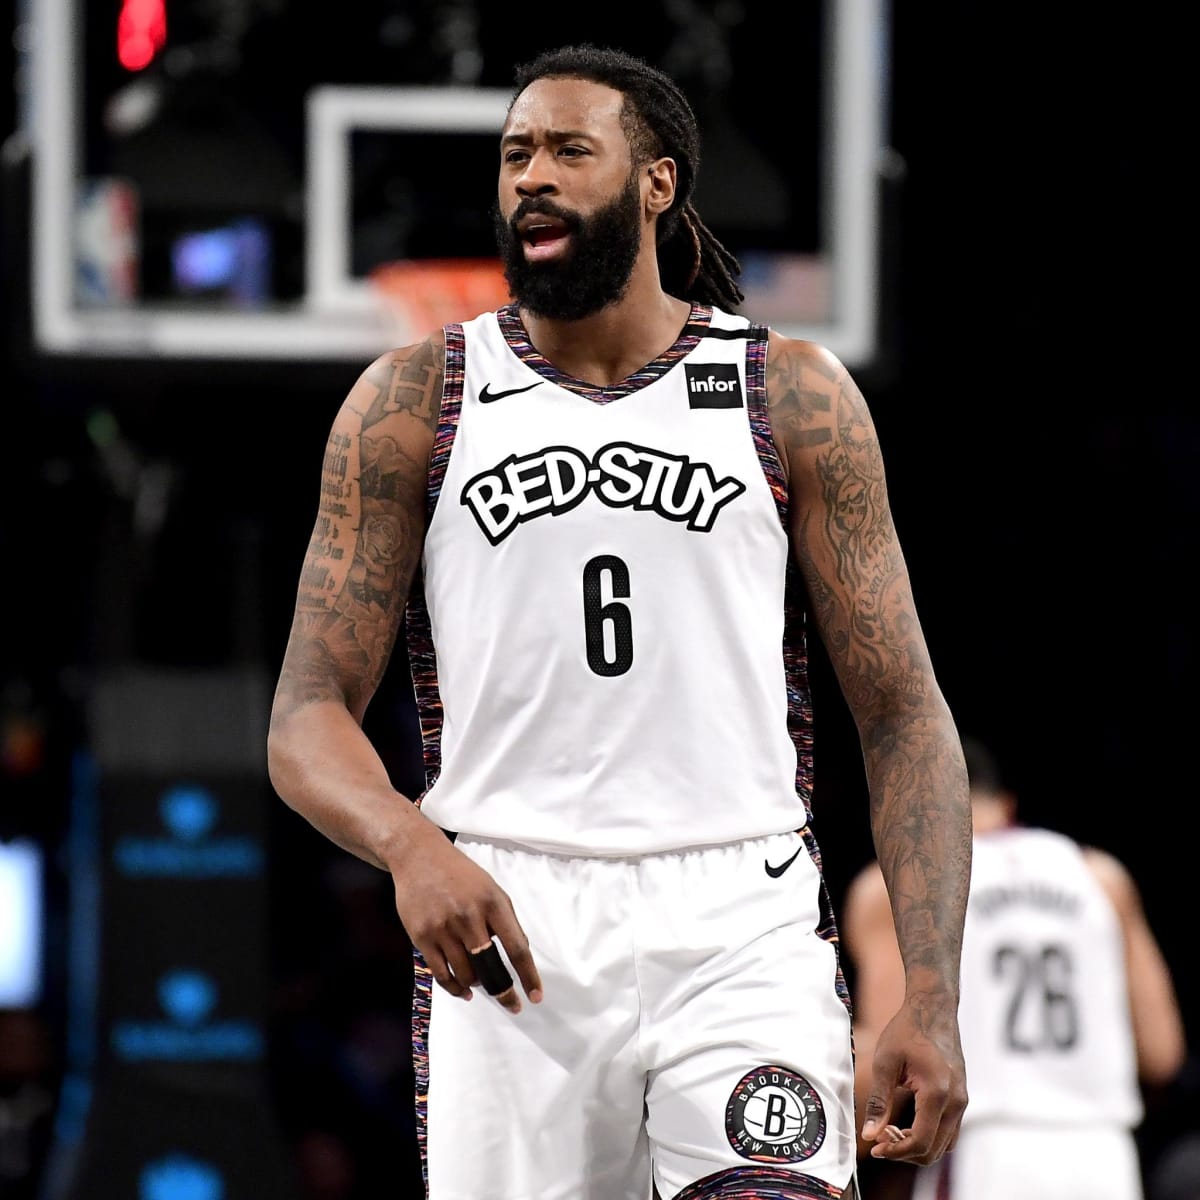 DeAndre Is Happy To Be Laker: "I'm Extremely Excited..." -